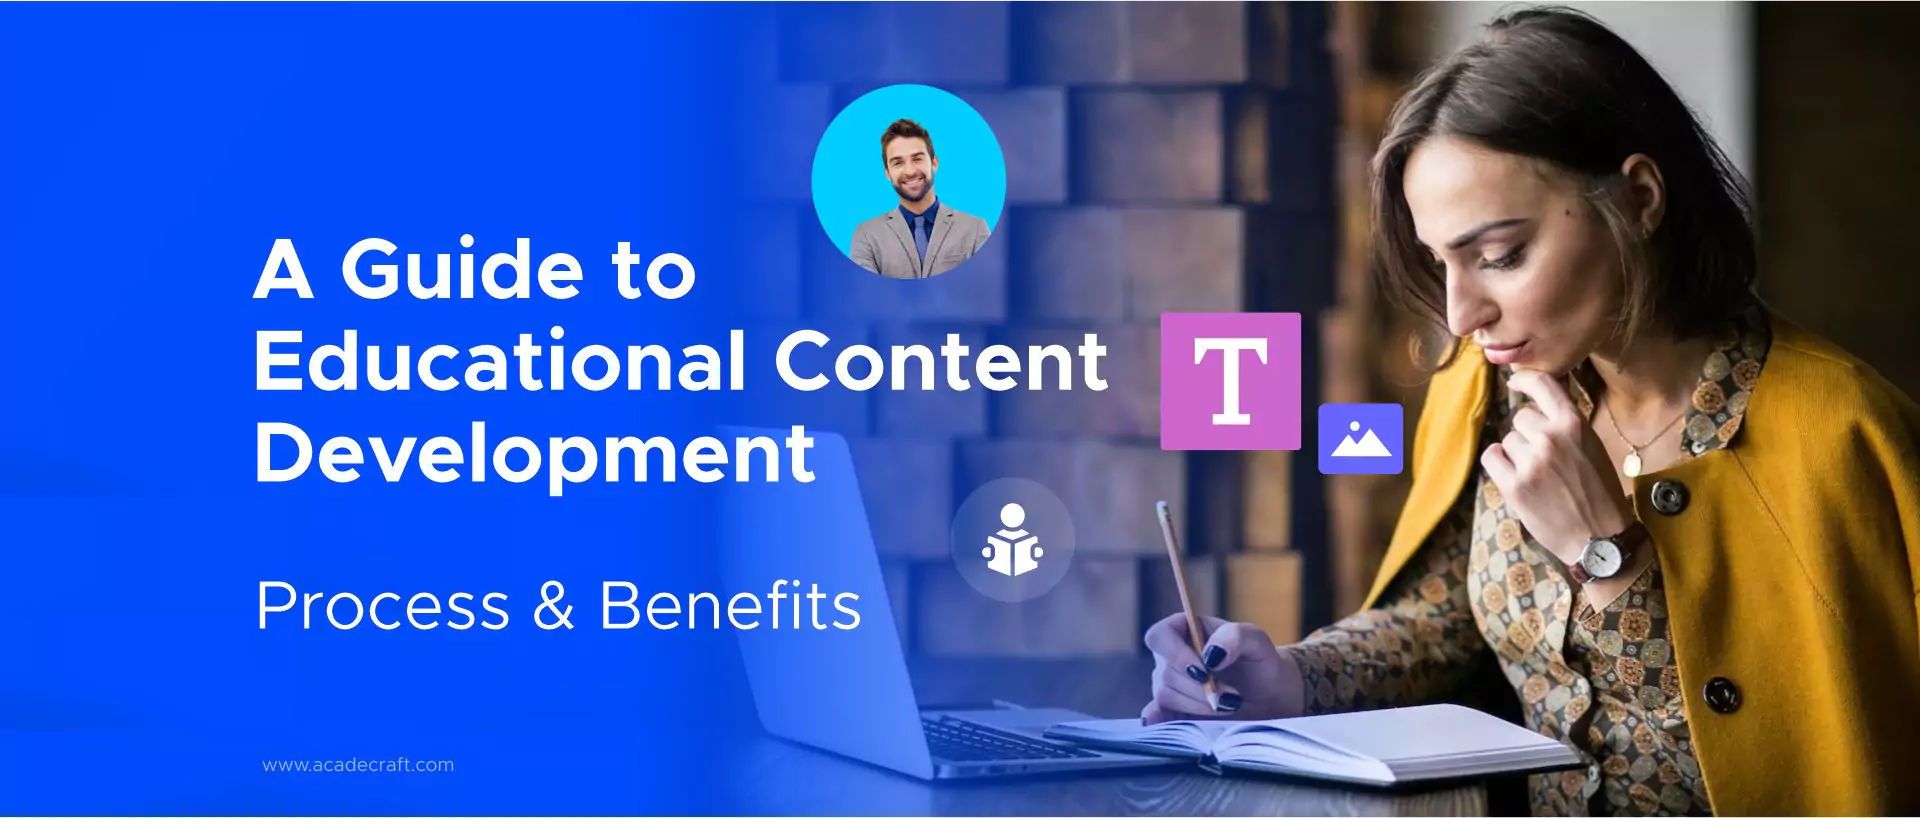 Guide to Educational Content Development'